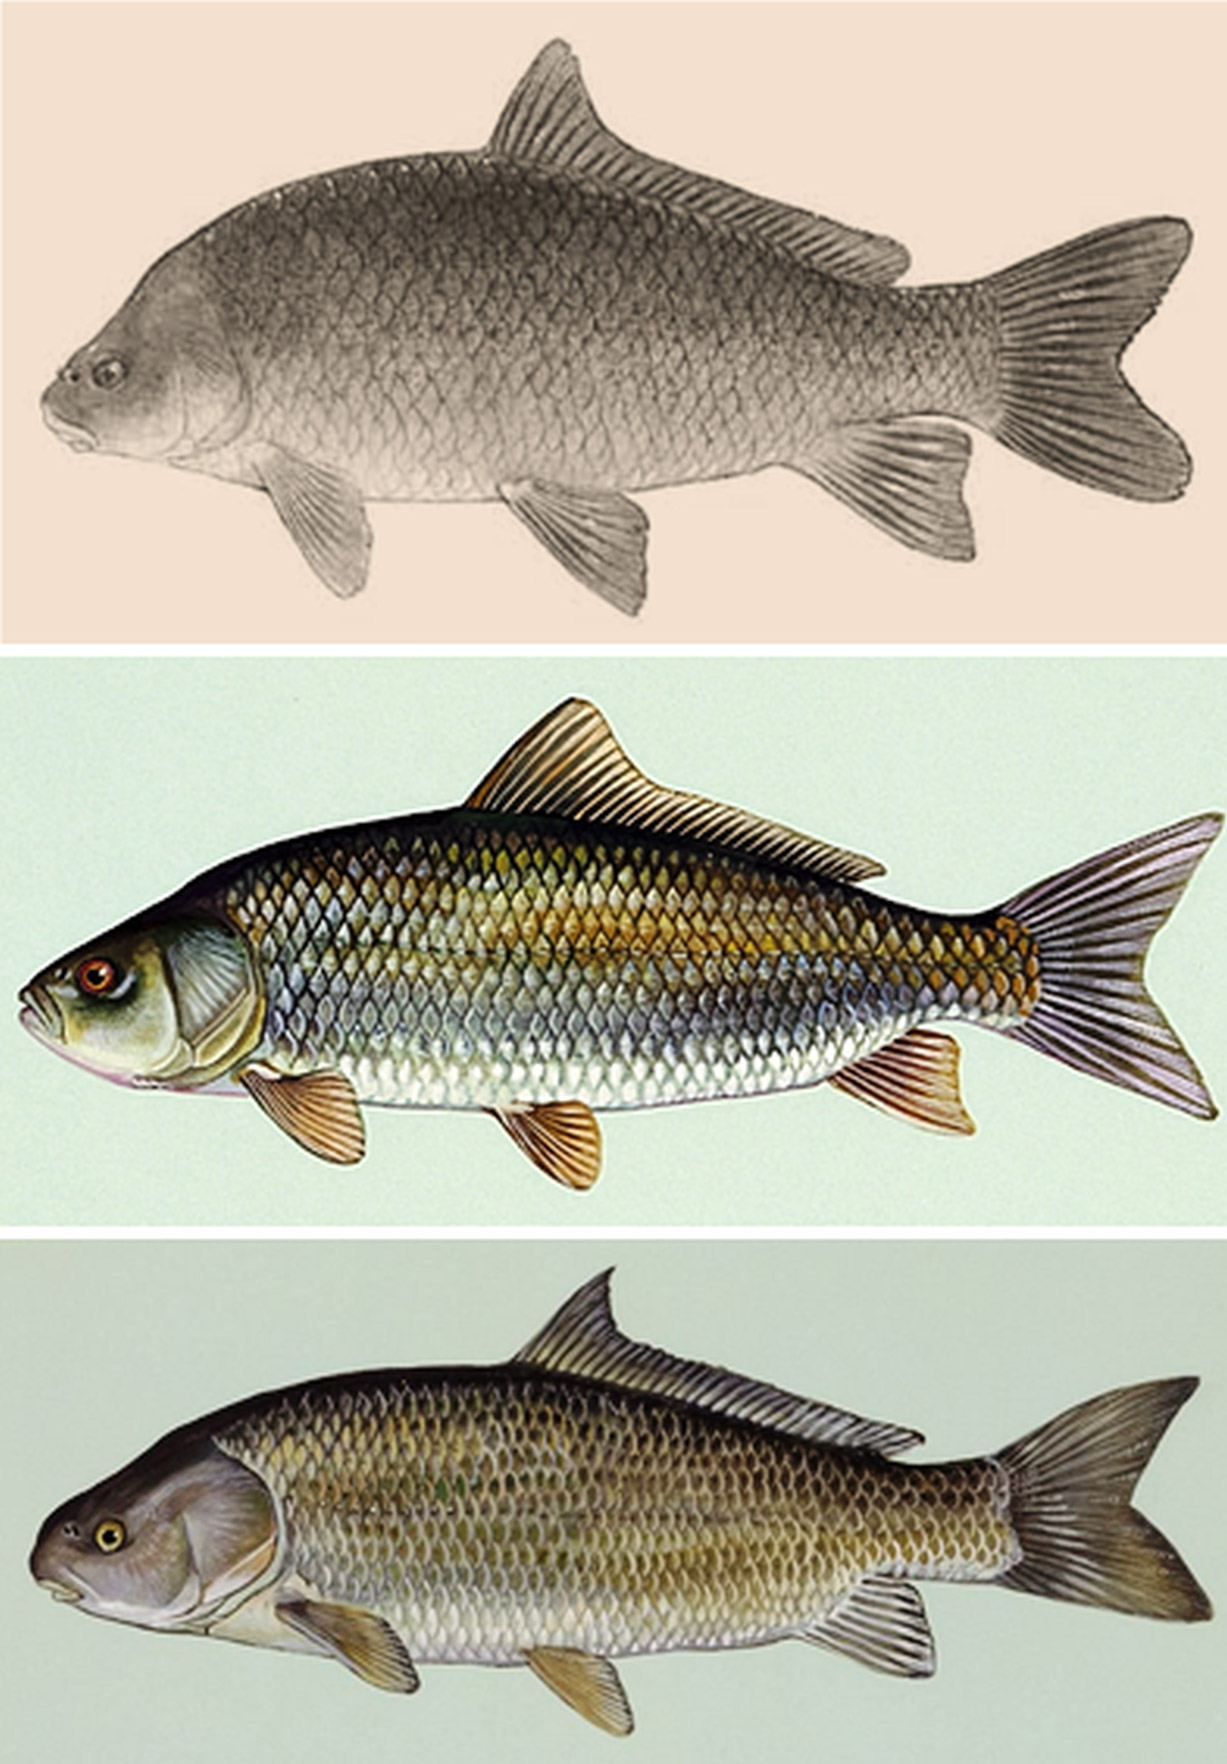 Three different types of fish without labels